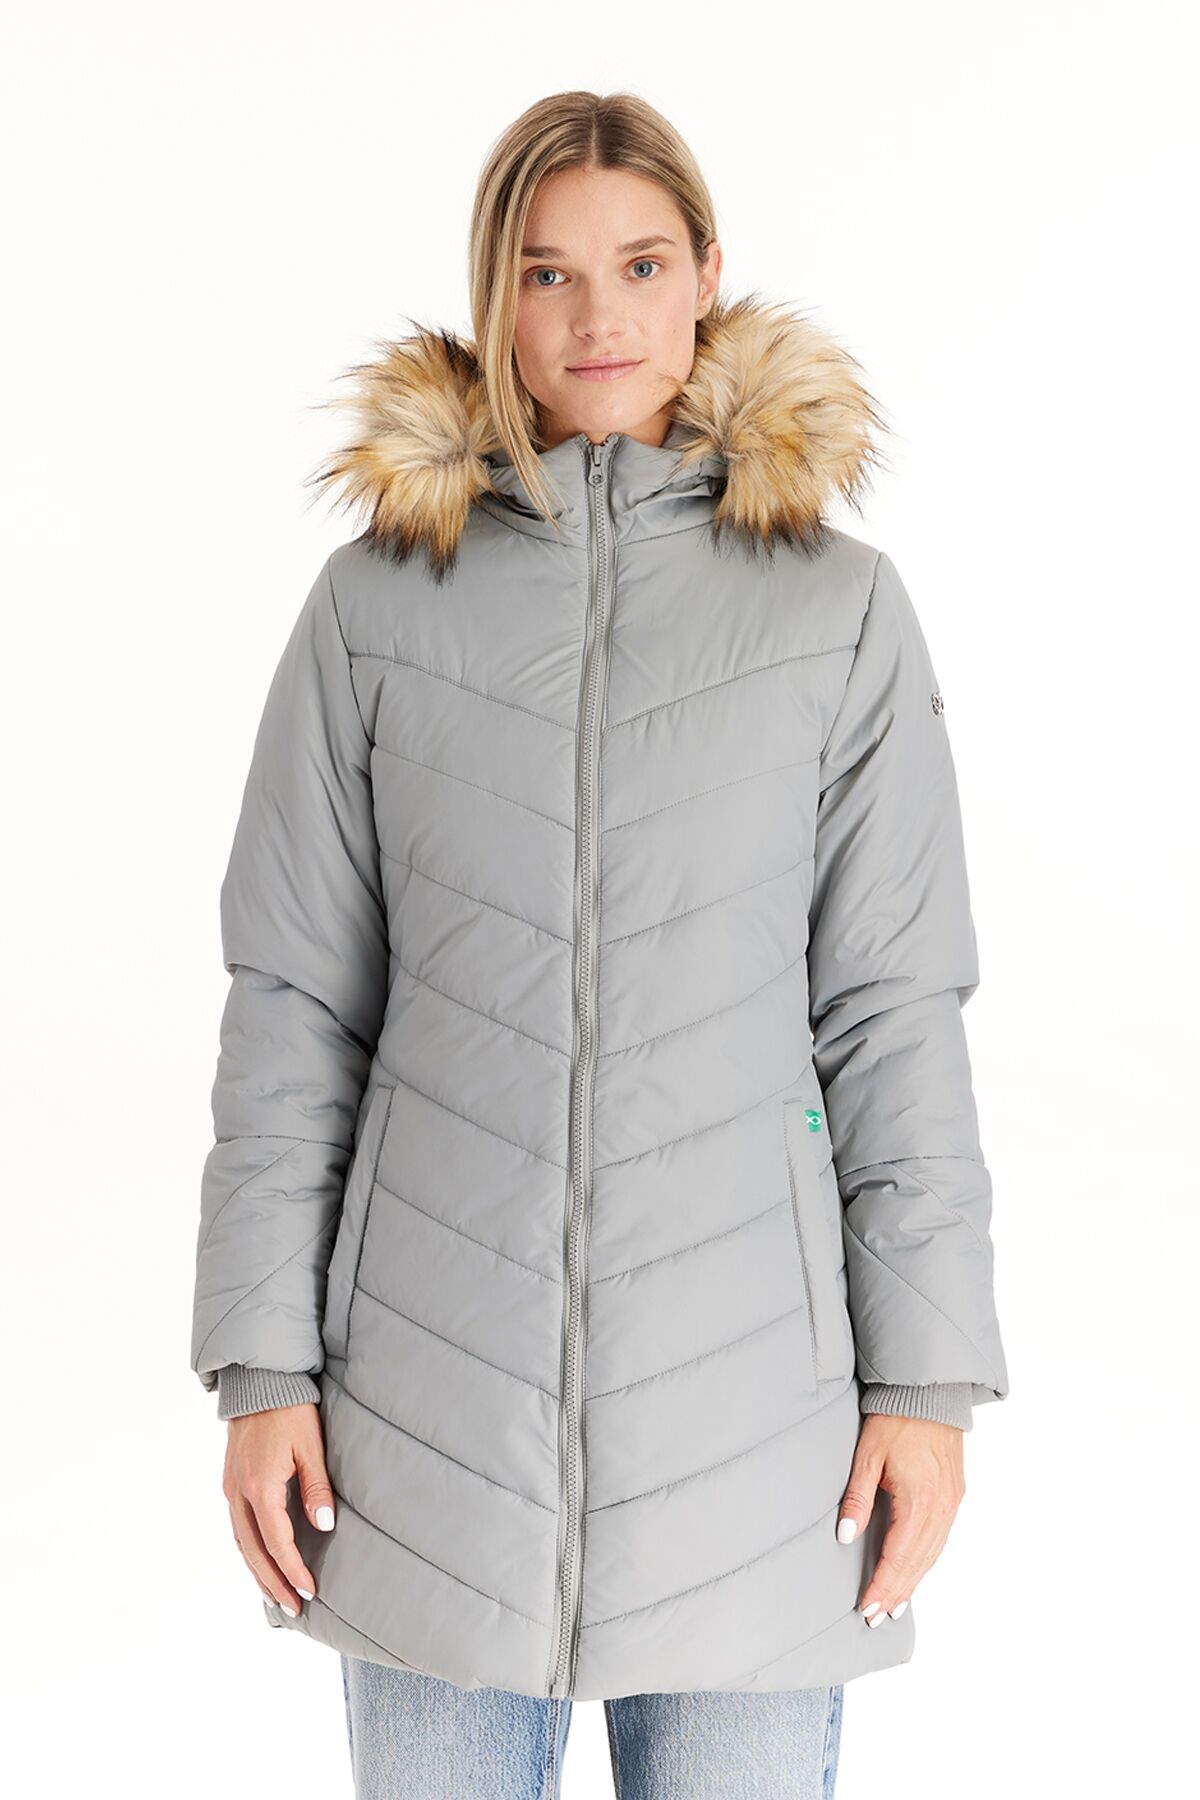 Modern Eternity Maternity Maternity Lexi - 3in1 Coat With Removable Hood - Light graphite